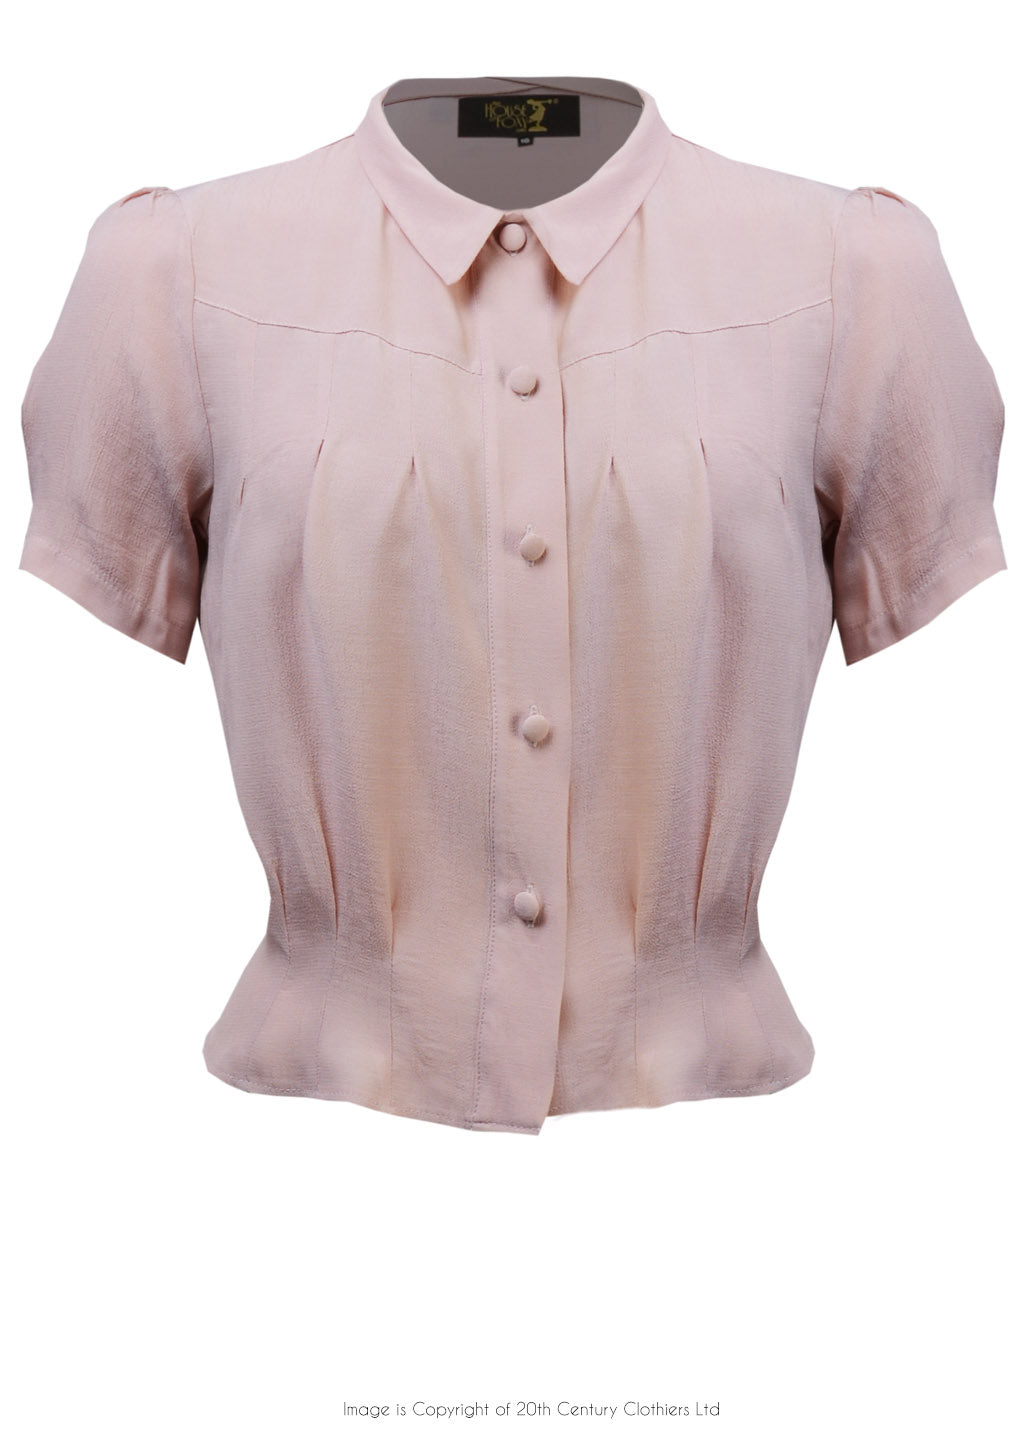 House of Foxy 1930’s Bonnie Blouse in Blush